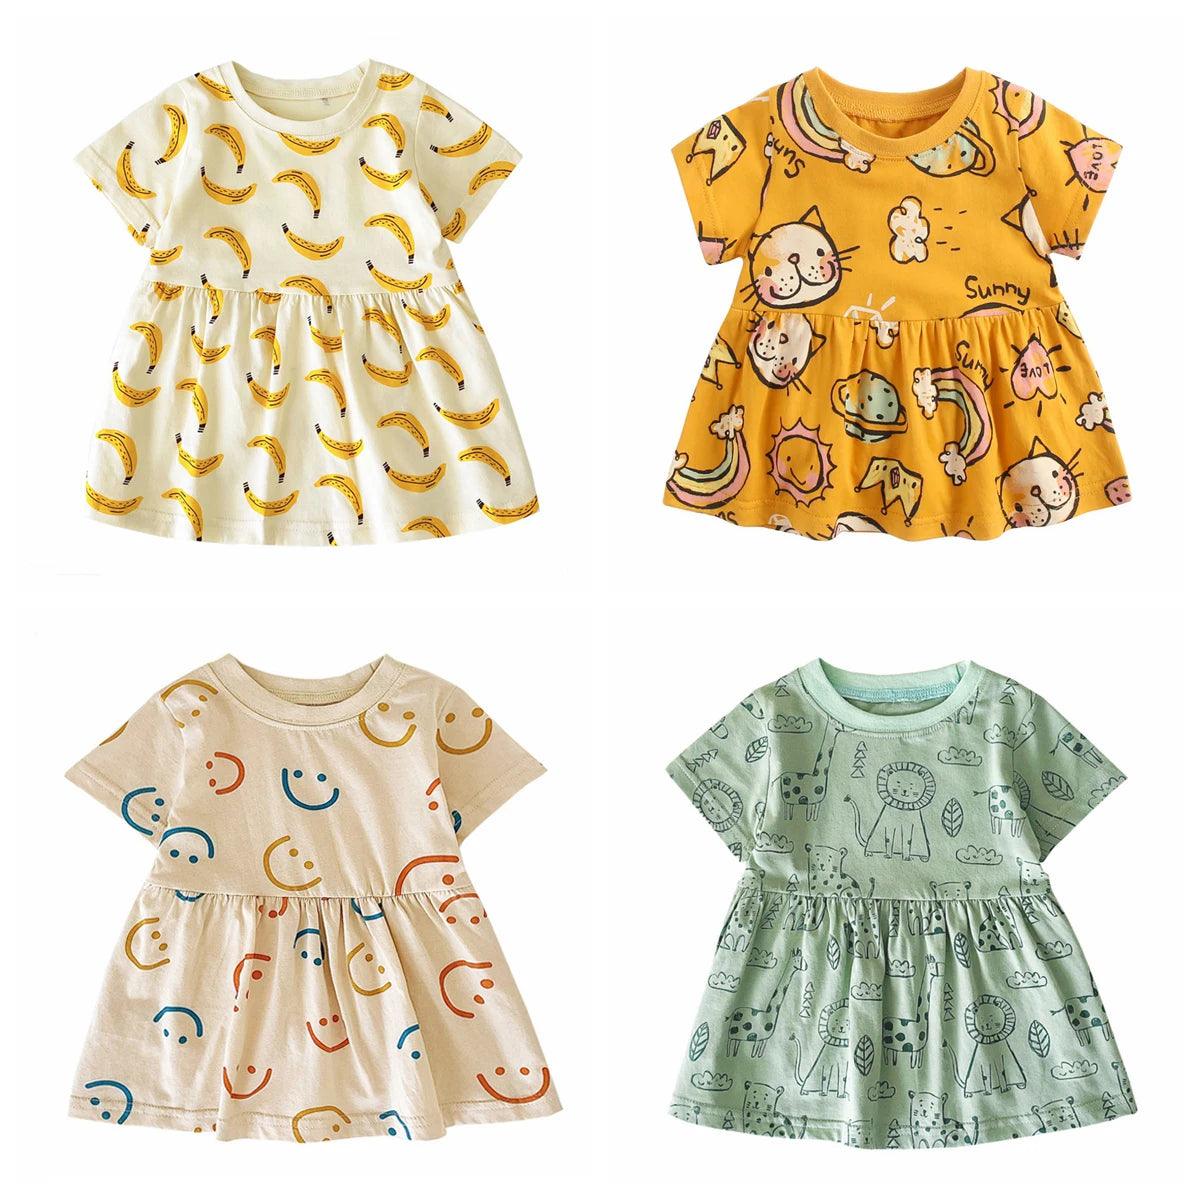 Adorable Cotton Baby Girl Summer Dress with Cute Patterns by Sanlutoz  ourlum.com   